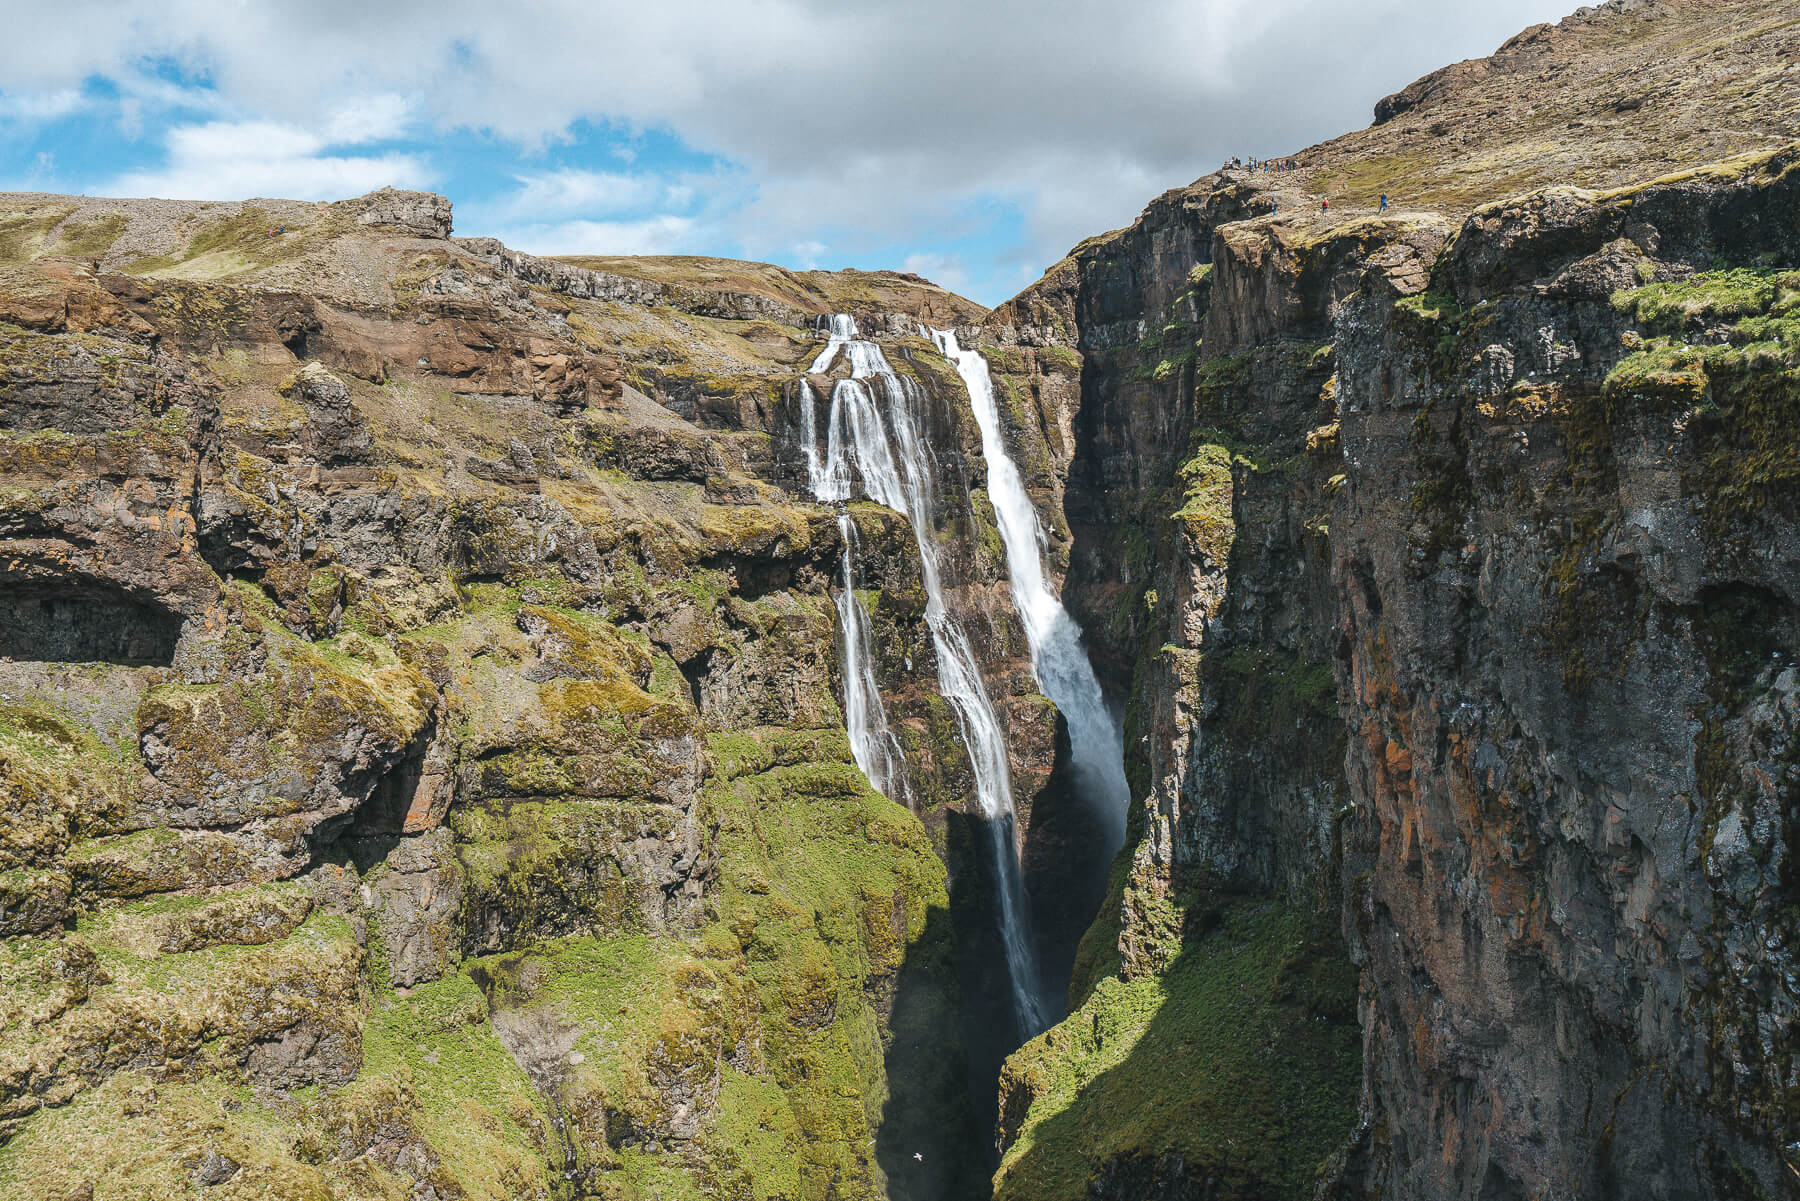 Hiking to Glymur, Iceland’s Second Tallest Waterfall